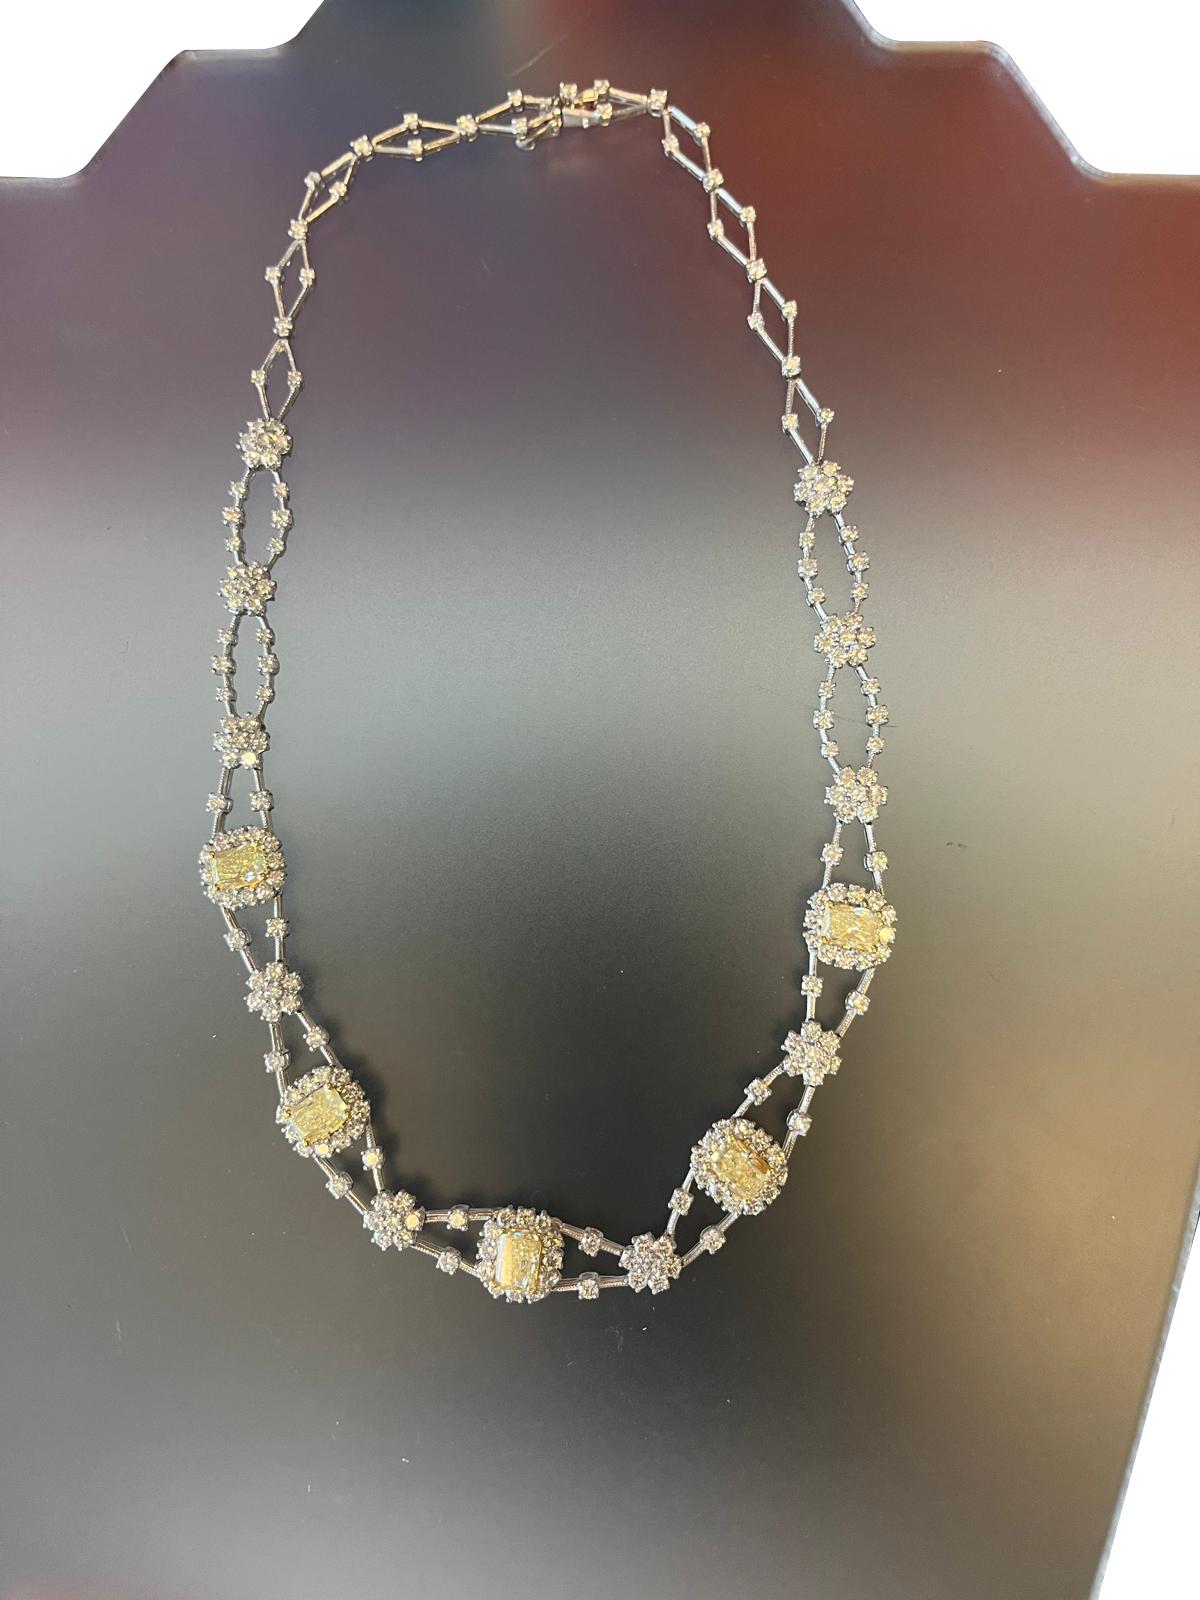 11.8ctw Natural Radiant Cut Yellow Fancy Color 5.80ct White Diamonds Necklace For Sale 1